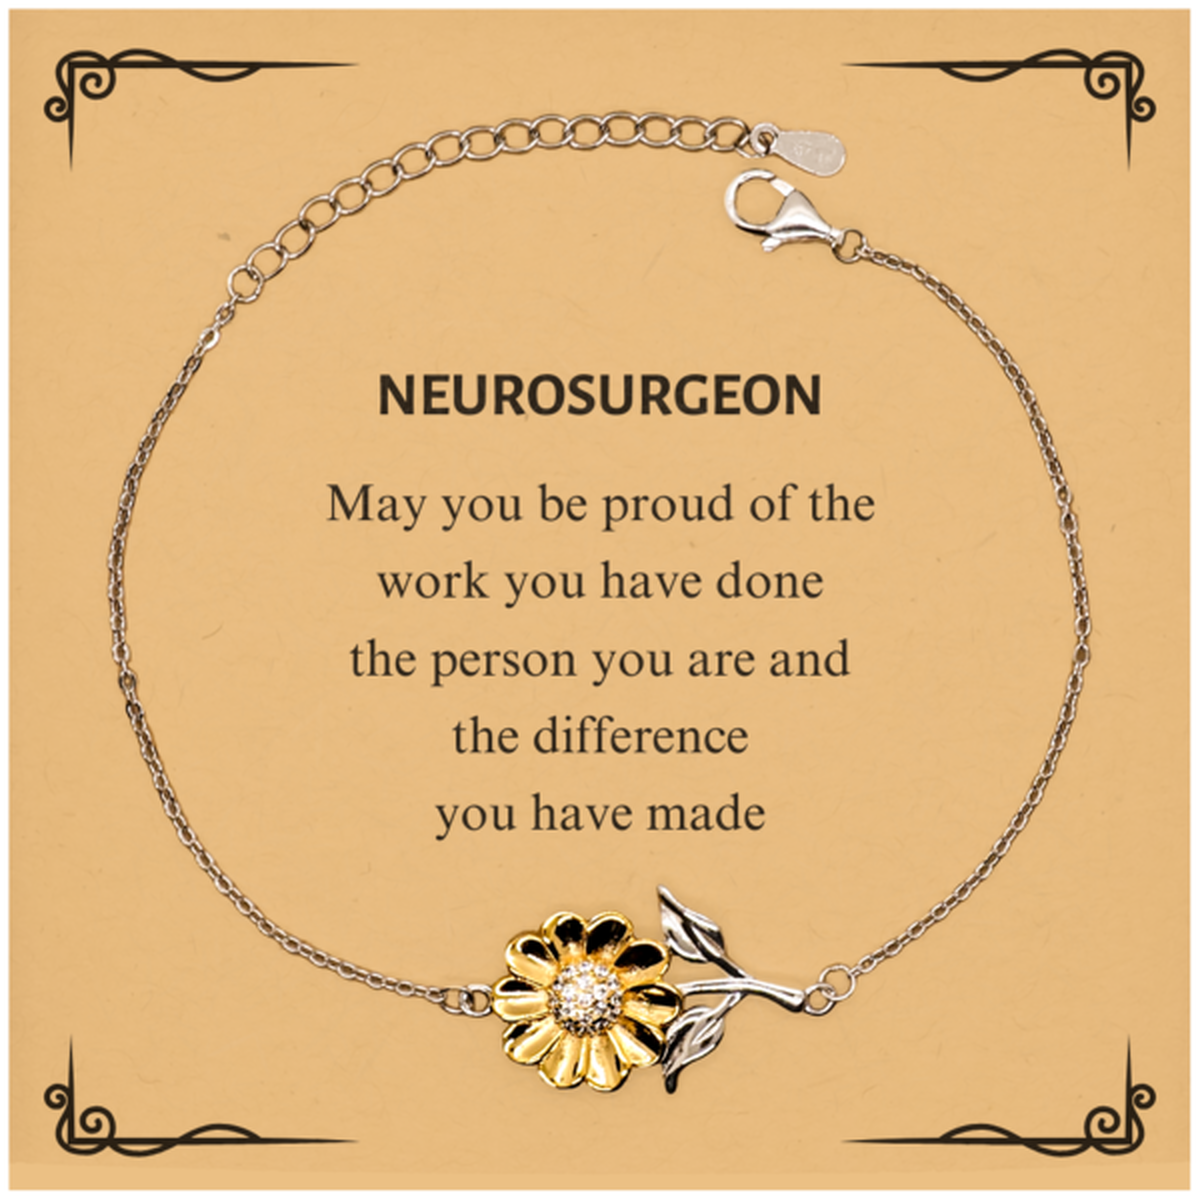 Neurosurgeon May you be proud of the work you have done, Retirement Neurosurgeon Sunflower Bracelet for Colleague Appreciation Gifts Amazing for Neurosurgeon